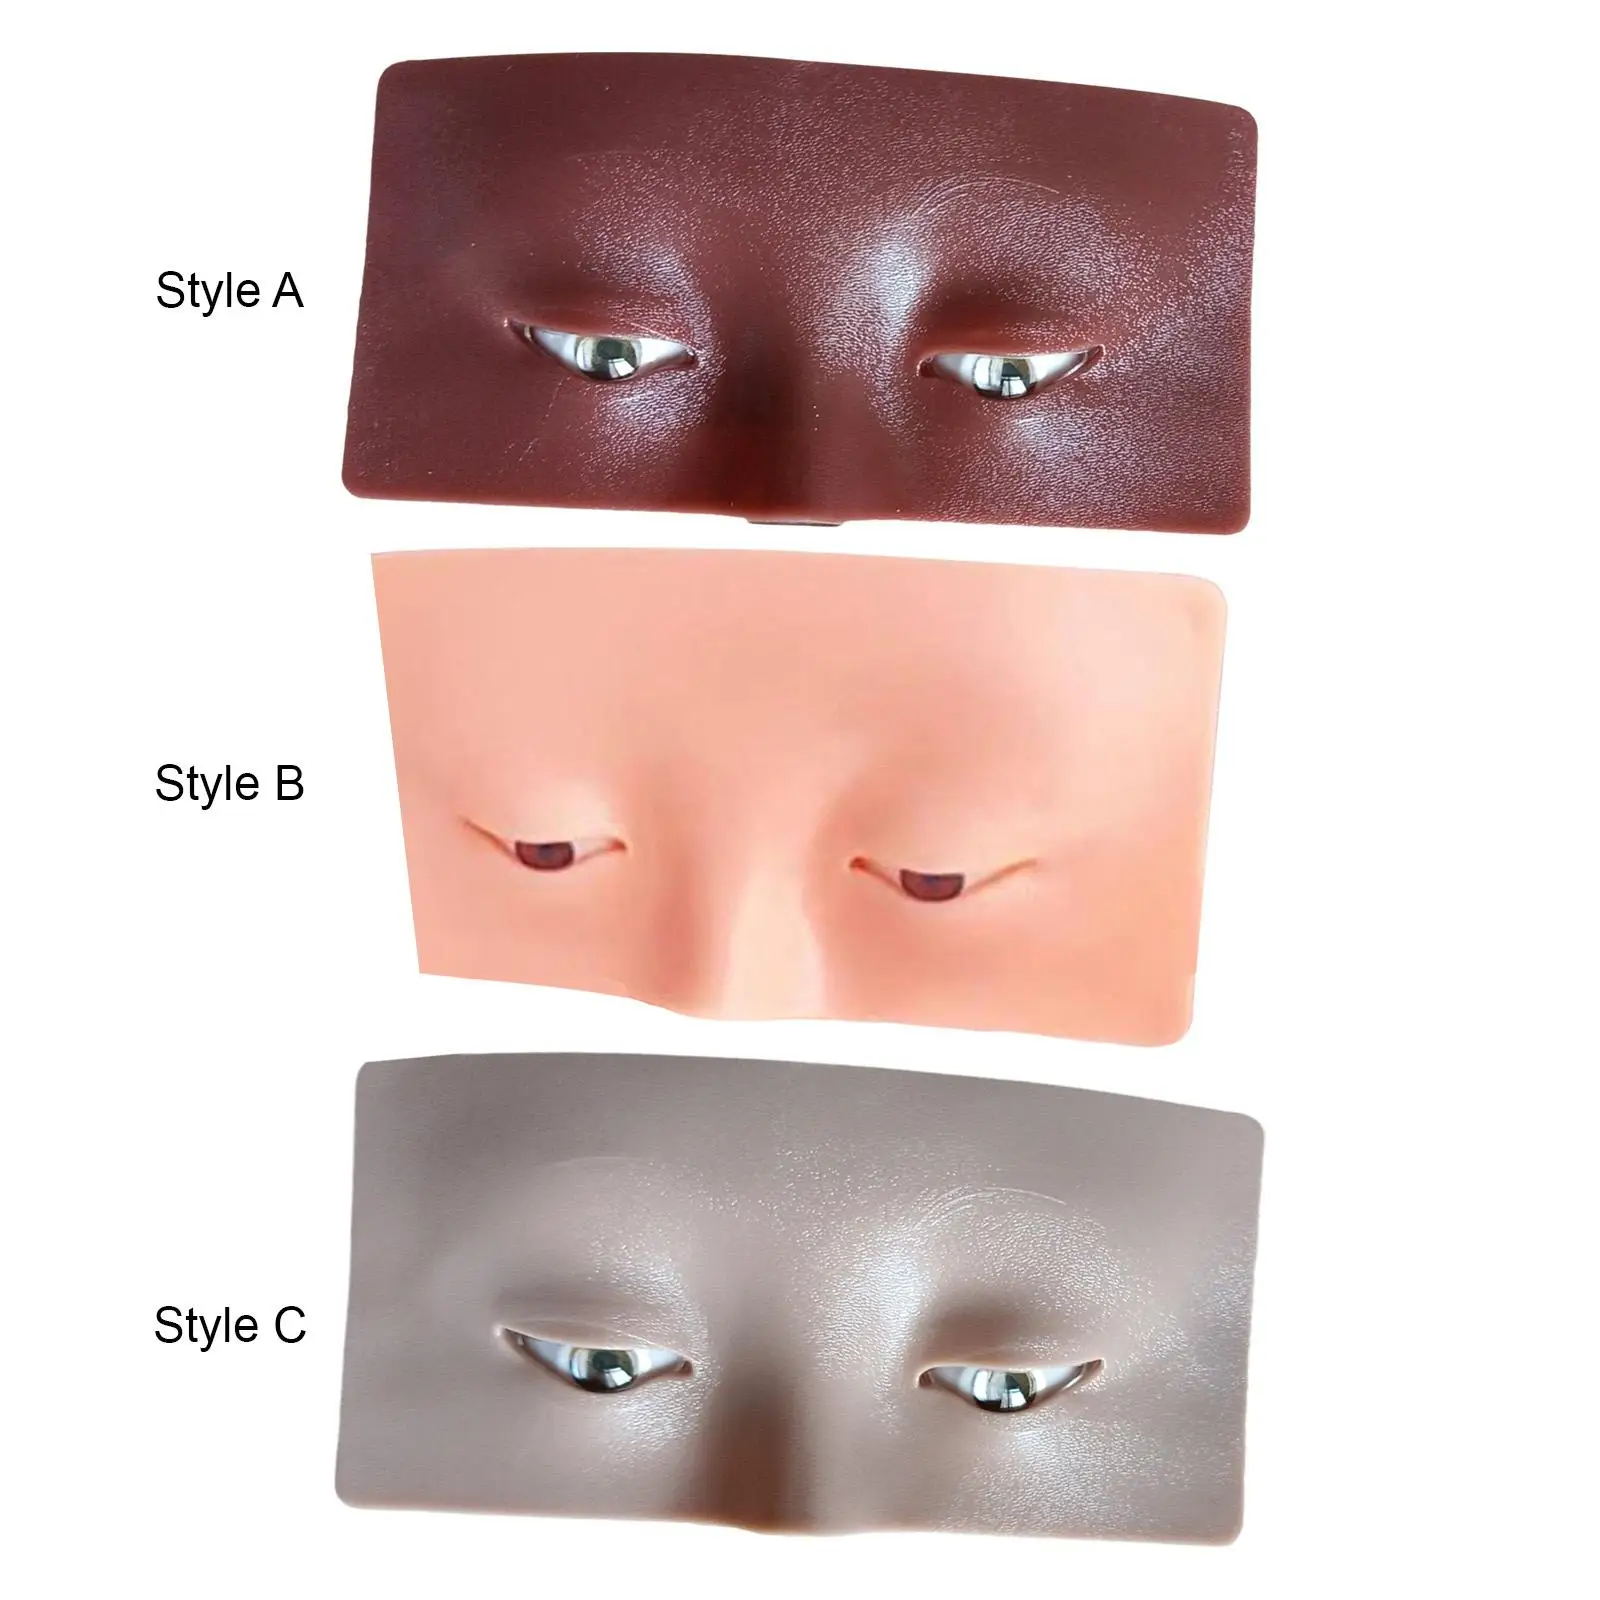 eye Makeup Practice Face Easy to Clean Beauty Tool Accessories for Makeup Training Professional Makeup Artists Cosmetologist